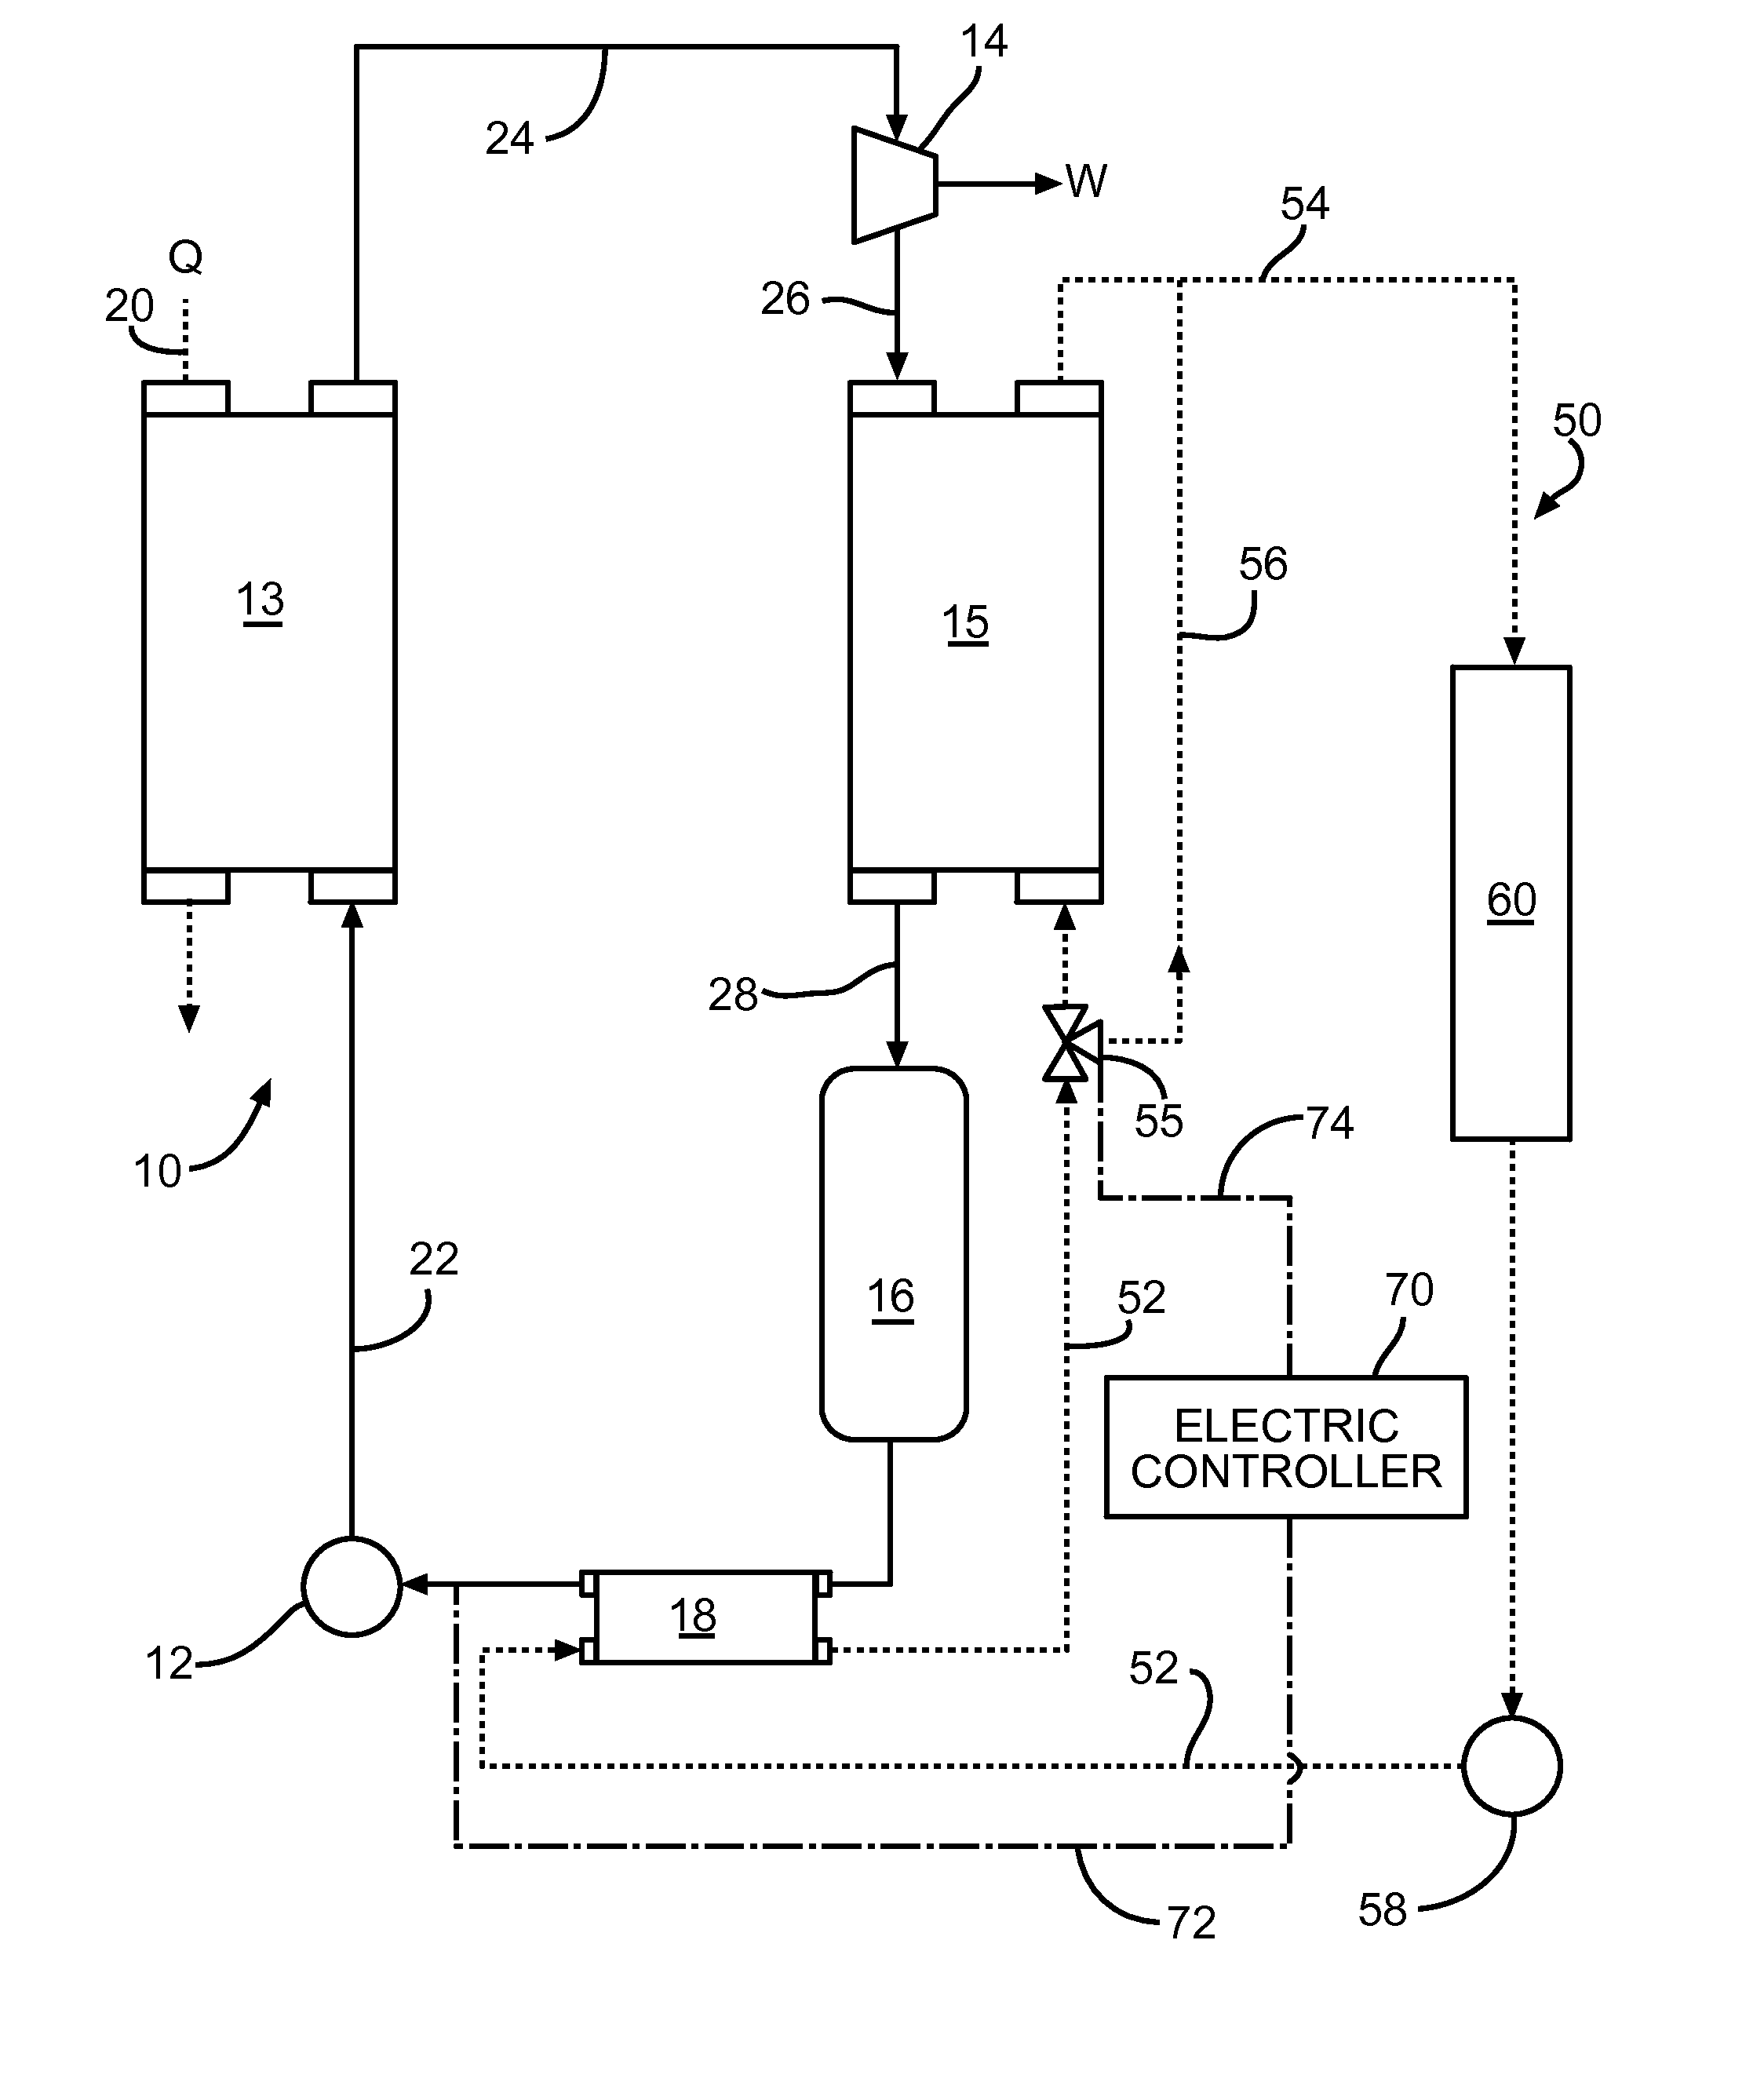 Energy recovery system and method using an organic rankine cycle with condenser pressure regulation